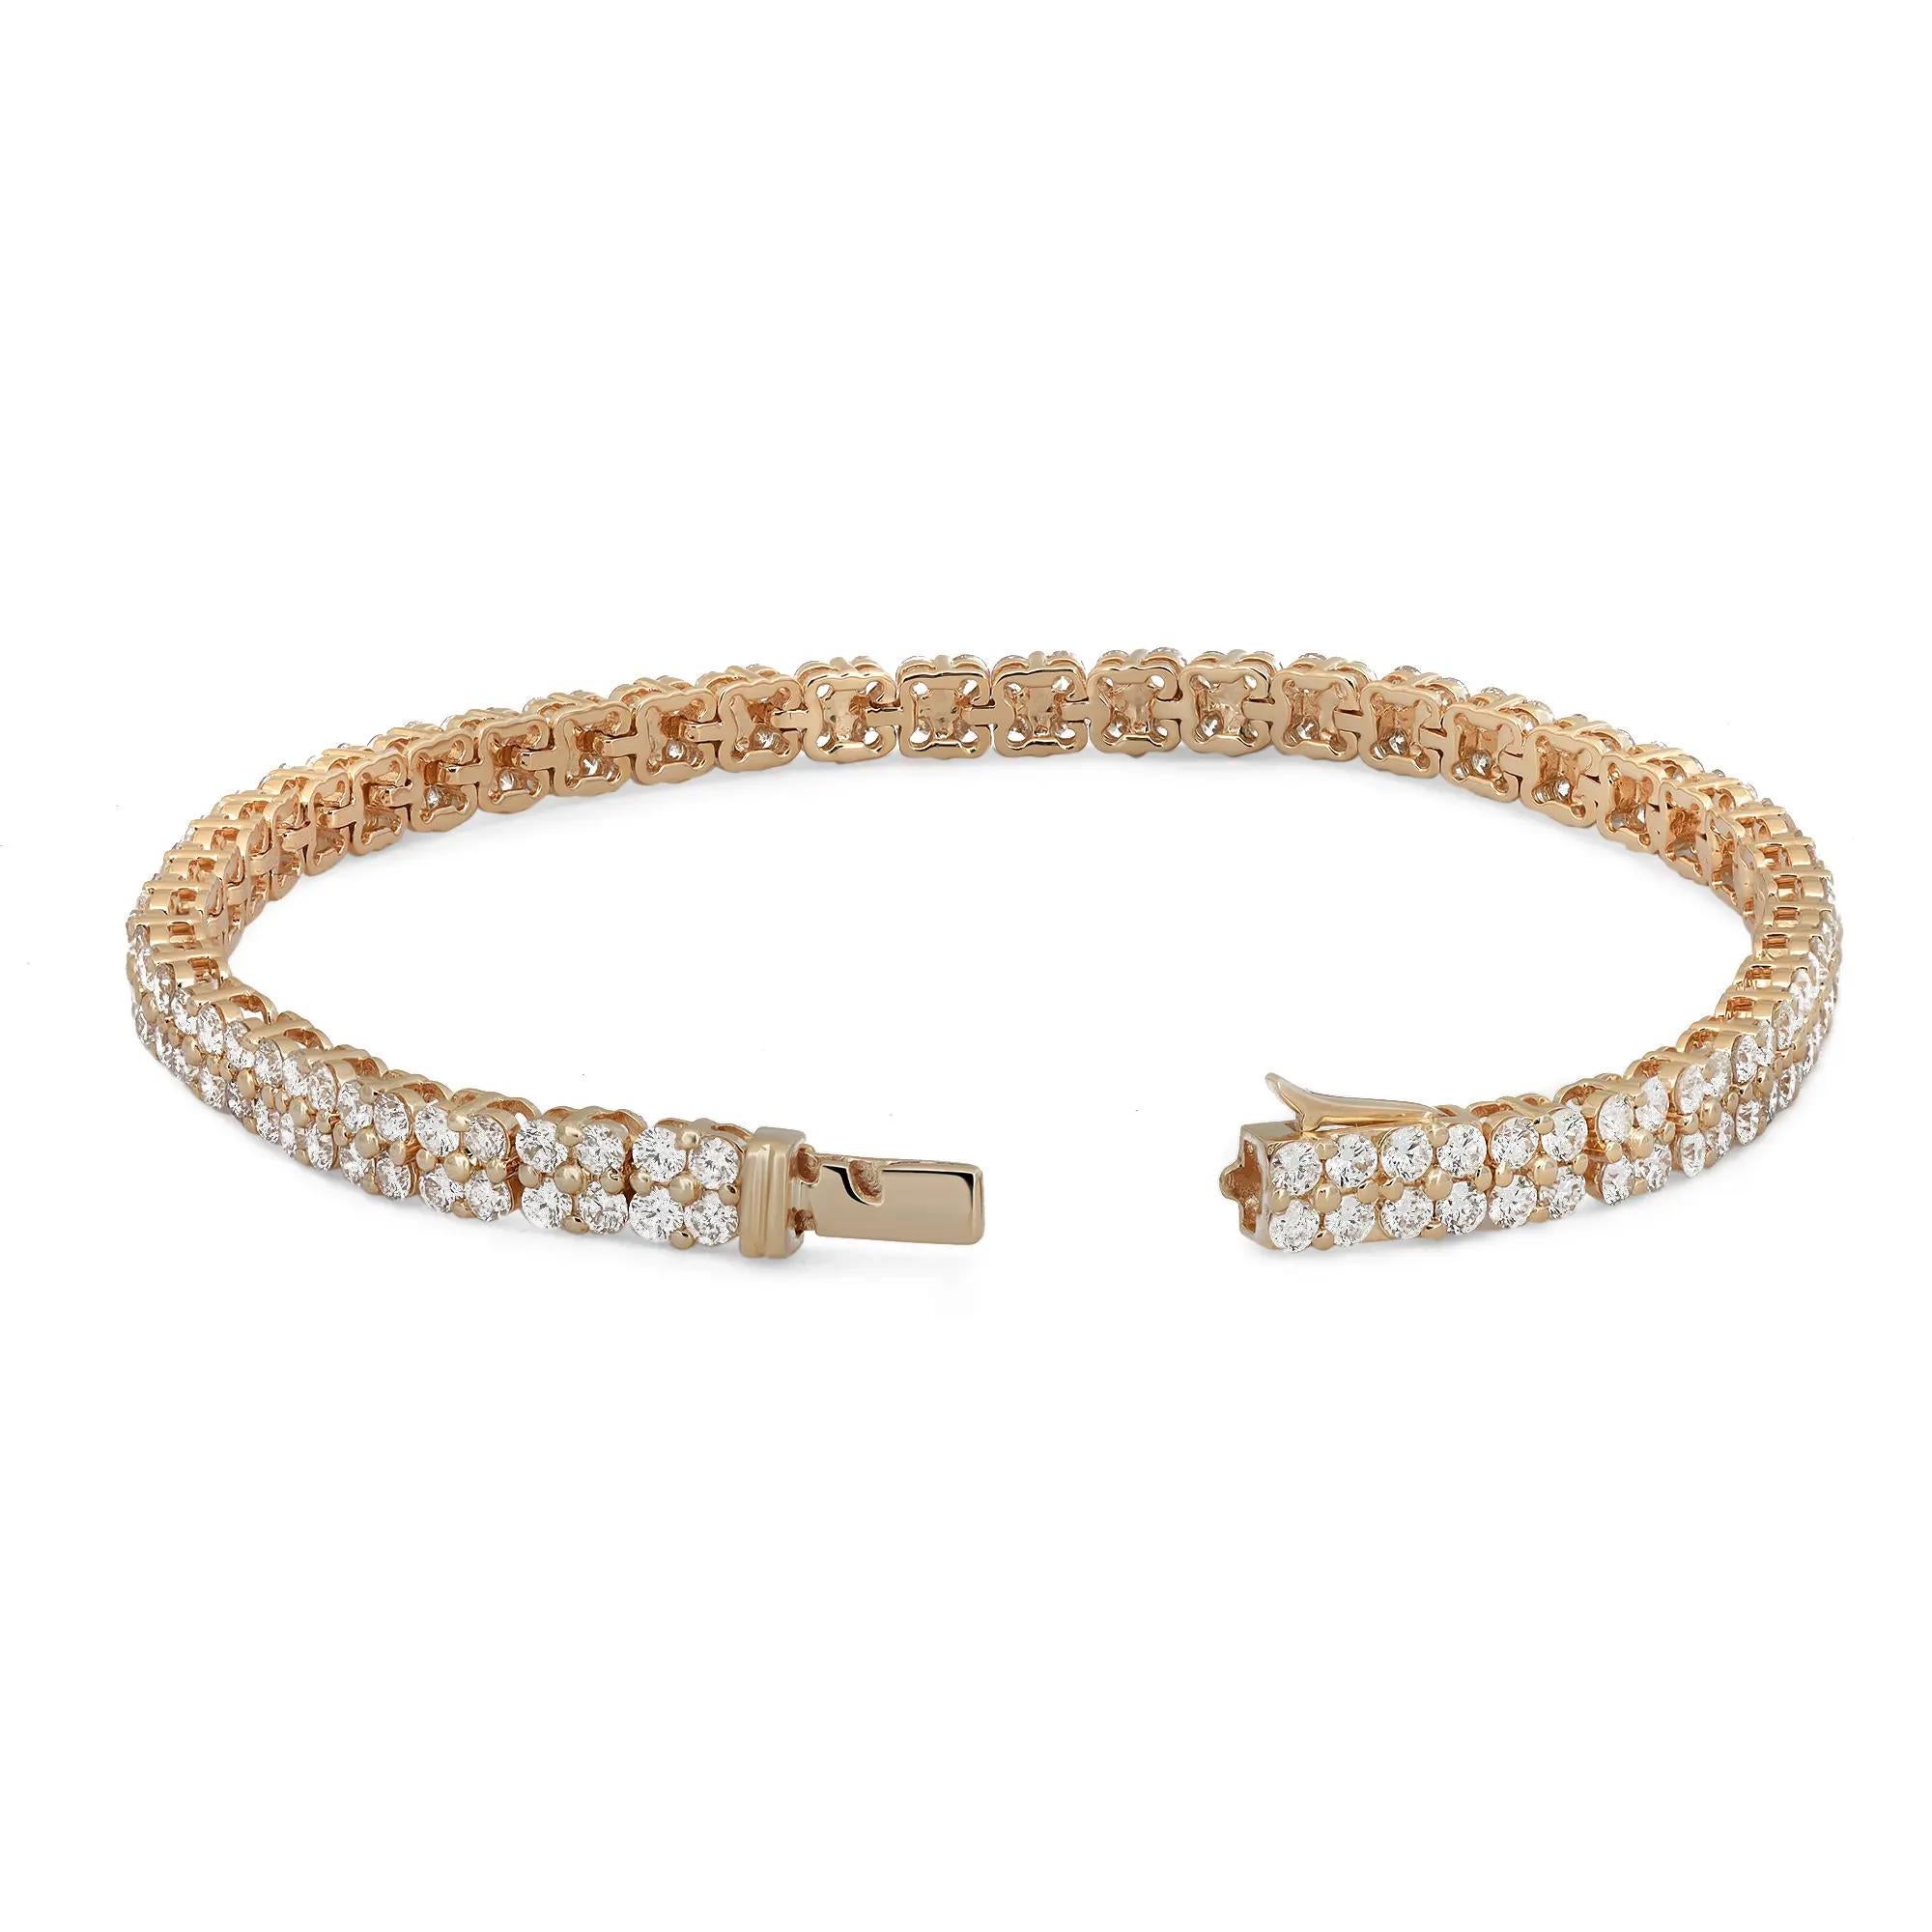 This beautifully crafted Rachael Koen timeless beauty tennis bracelet features prong set round brilliant cut diamonds set in 18k yellow Gold. This truly gorgeous handmade modern creation is a great addition to your jewelry collection. Set with 176